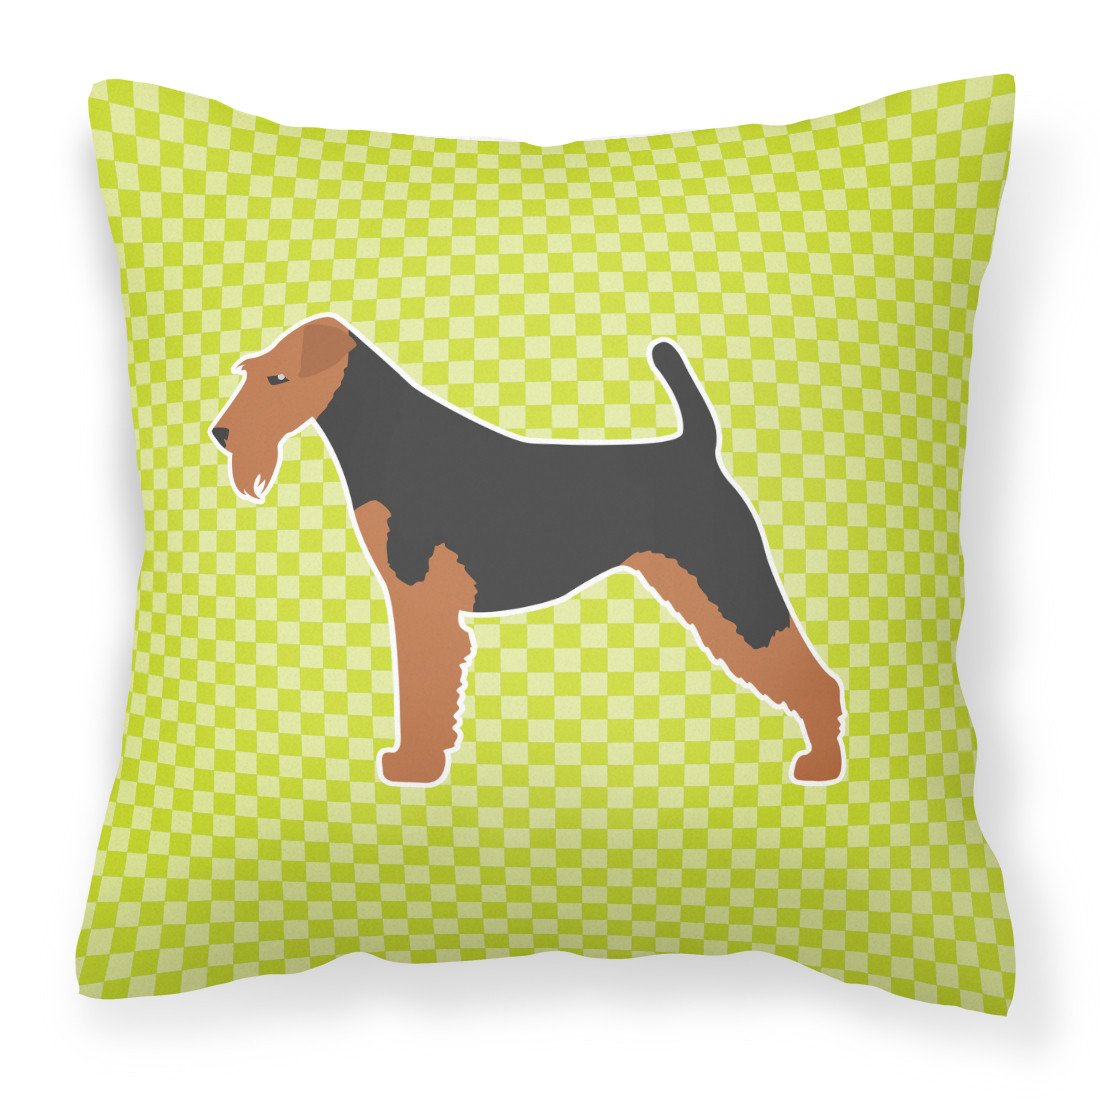 Airedale Terrier Checkerboard Green Fabric Decorative Pillow BB3857PW1818 by Caroline's Treasures